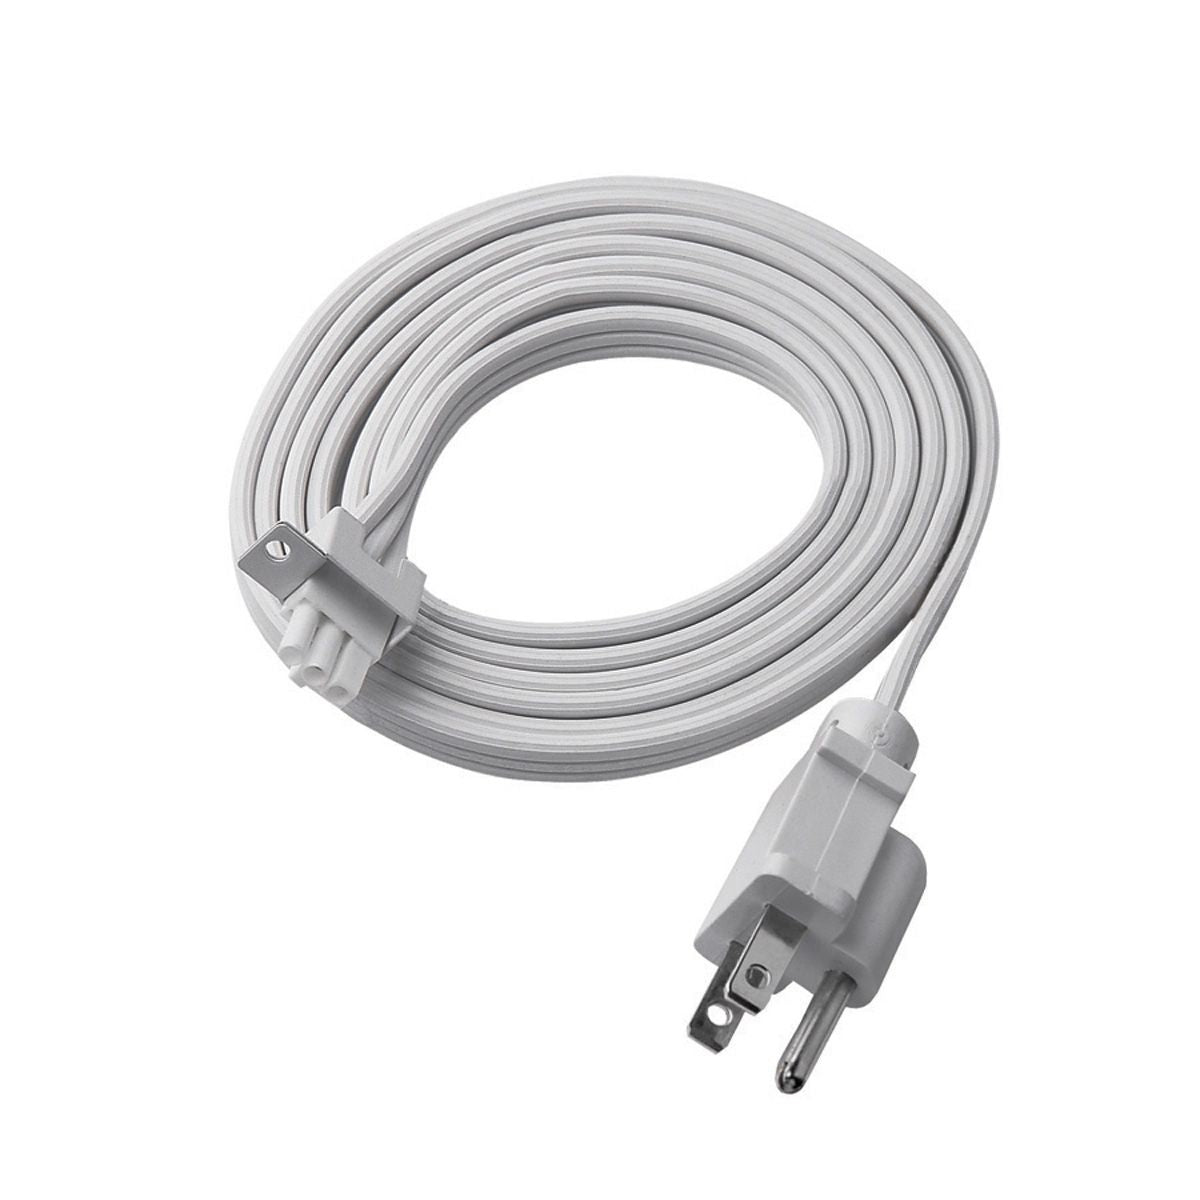 6ft Grounded Plug-in Power Cord For Undercabinet Lights, White Finish - Bees Lighting